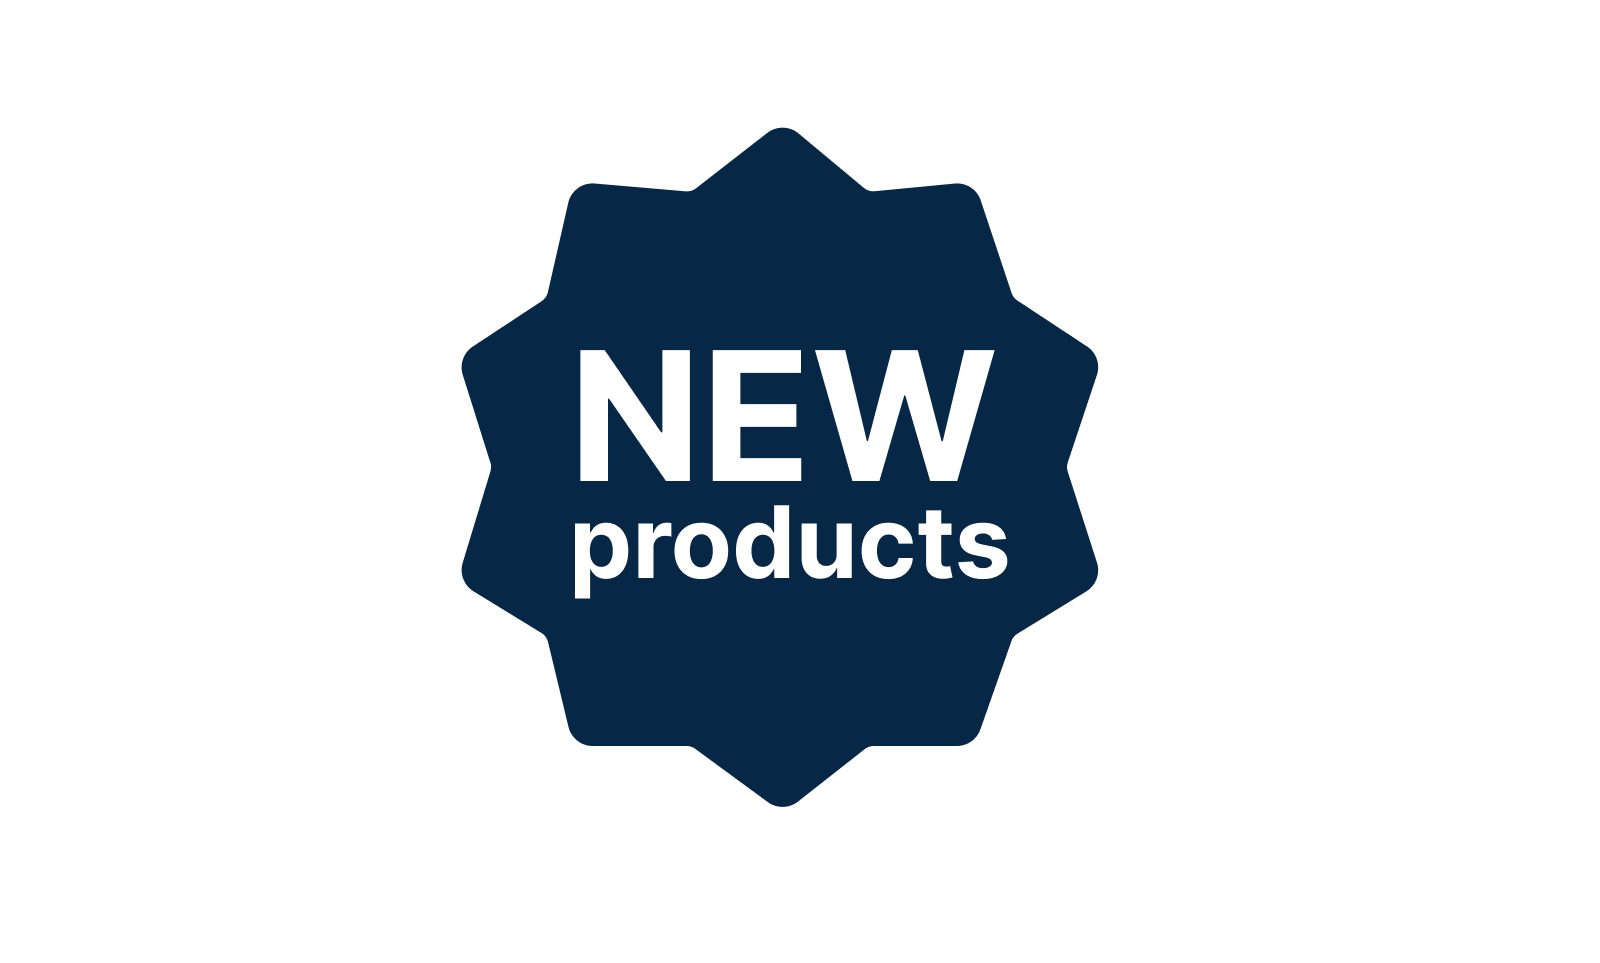 New products in our product range